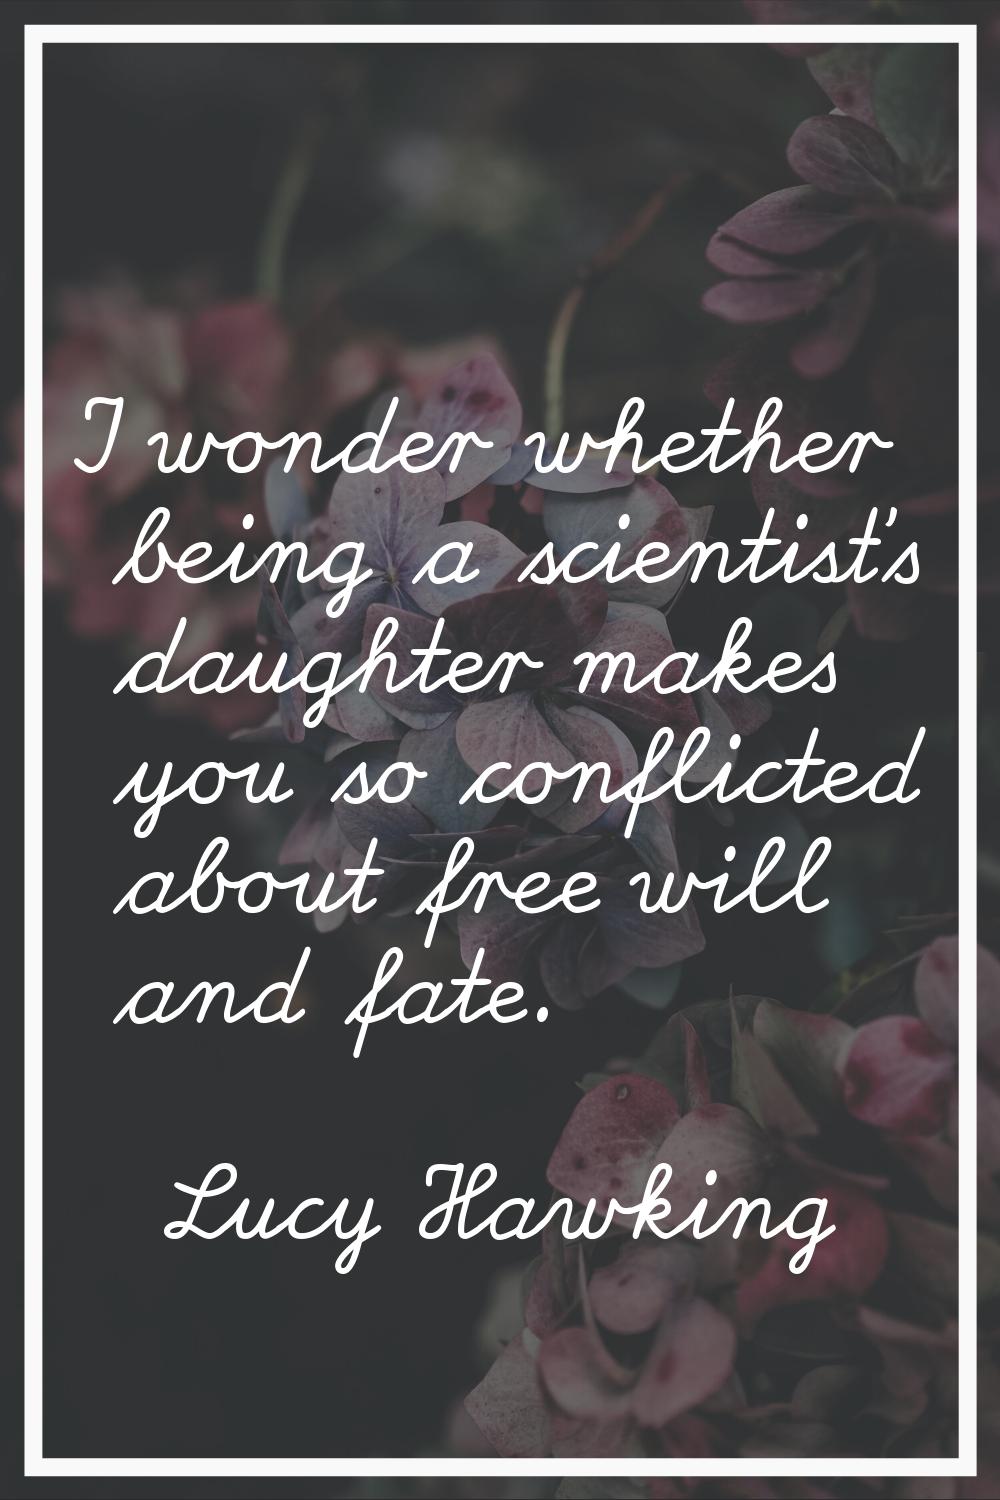 I wonder whether being a scientist's daughter makes you so conflicted about free will and fate.